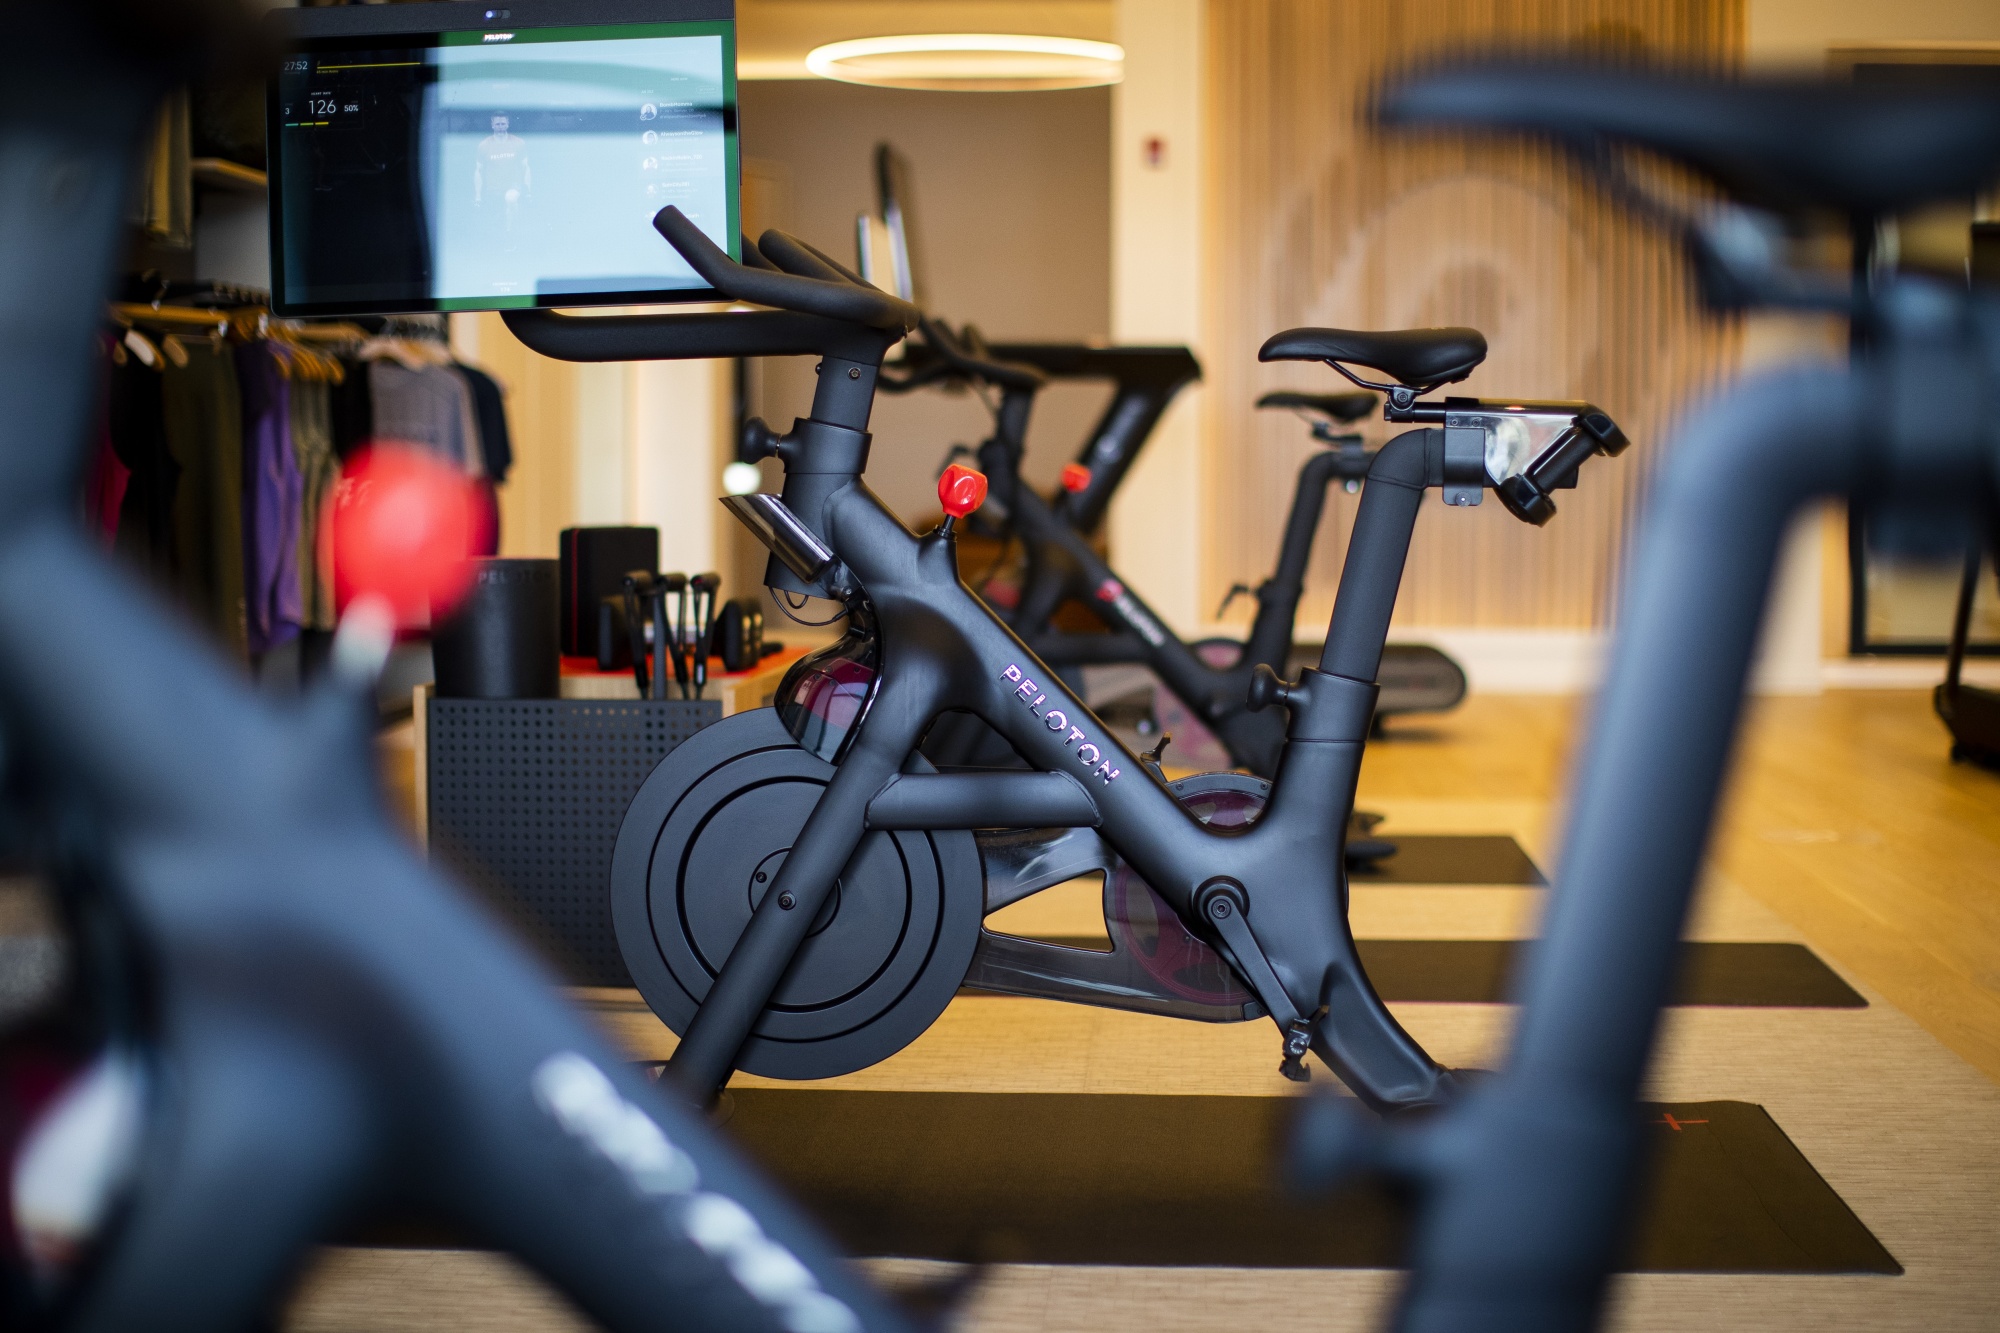 A Peloton stationary bike for sale at a showroom in Dedham, Mass.